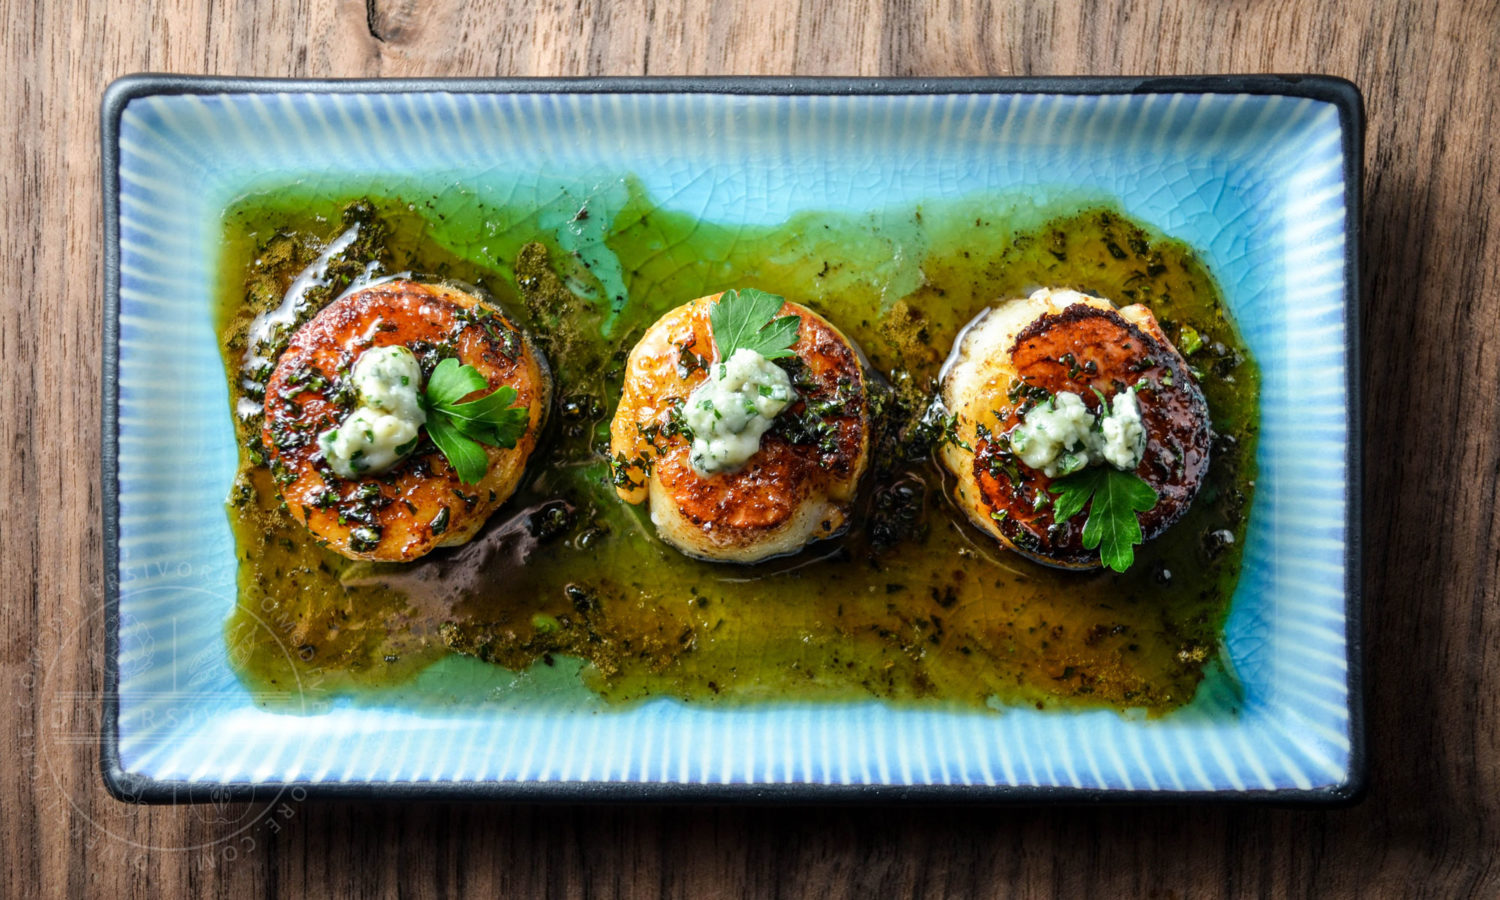 Seared scallops with a honey-parsley gastrique and topped with blue cheese - Diversivore.com